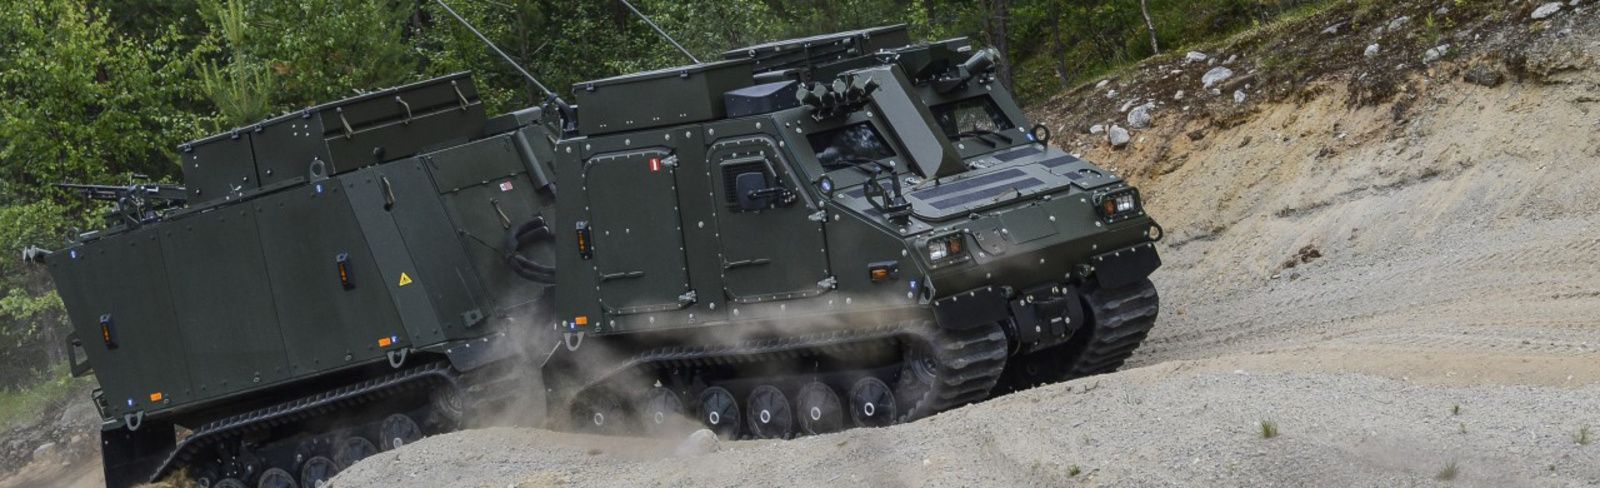 Sweden, Germany, and the UK to Jointly Procure BvS10 Vehicles